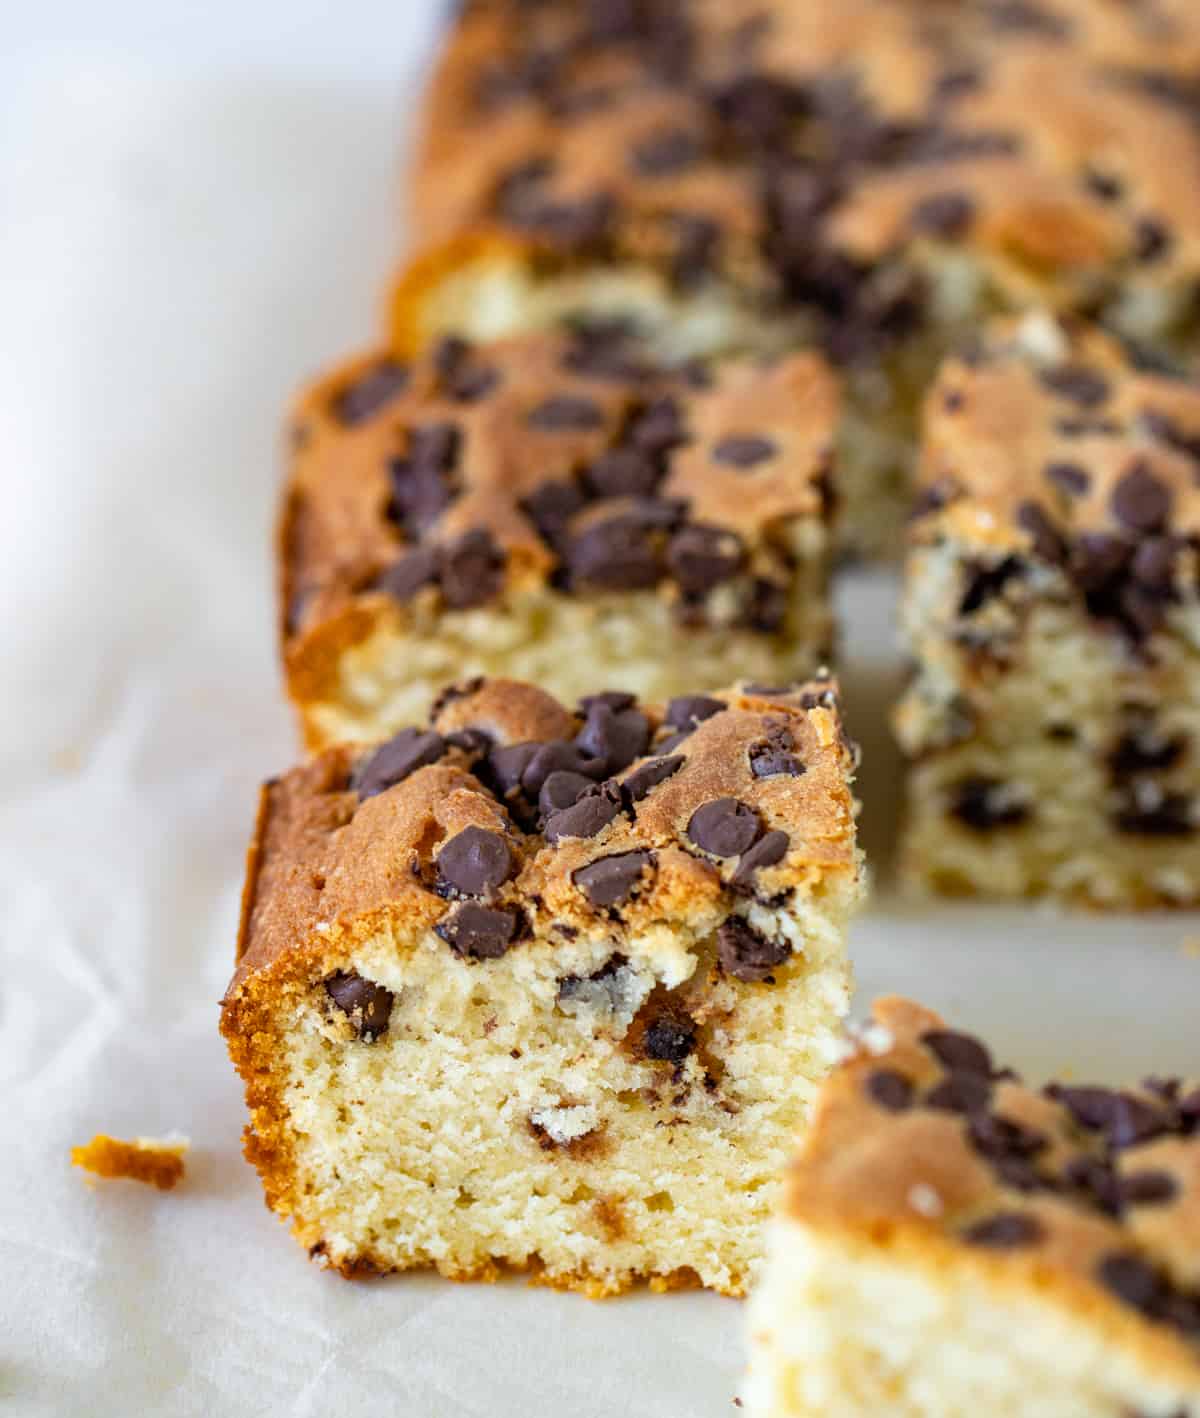 View from above of Squares of vanilla cake with chocolate chips on parchment paper.